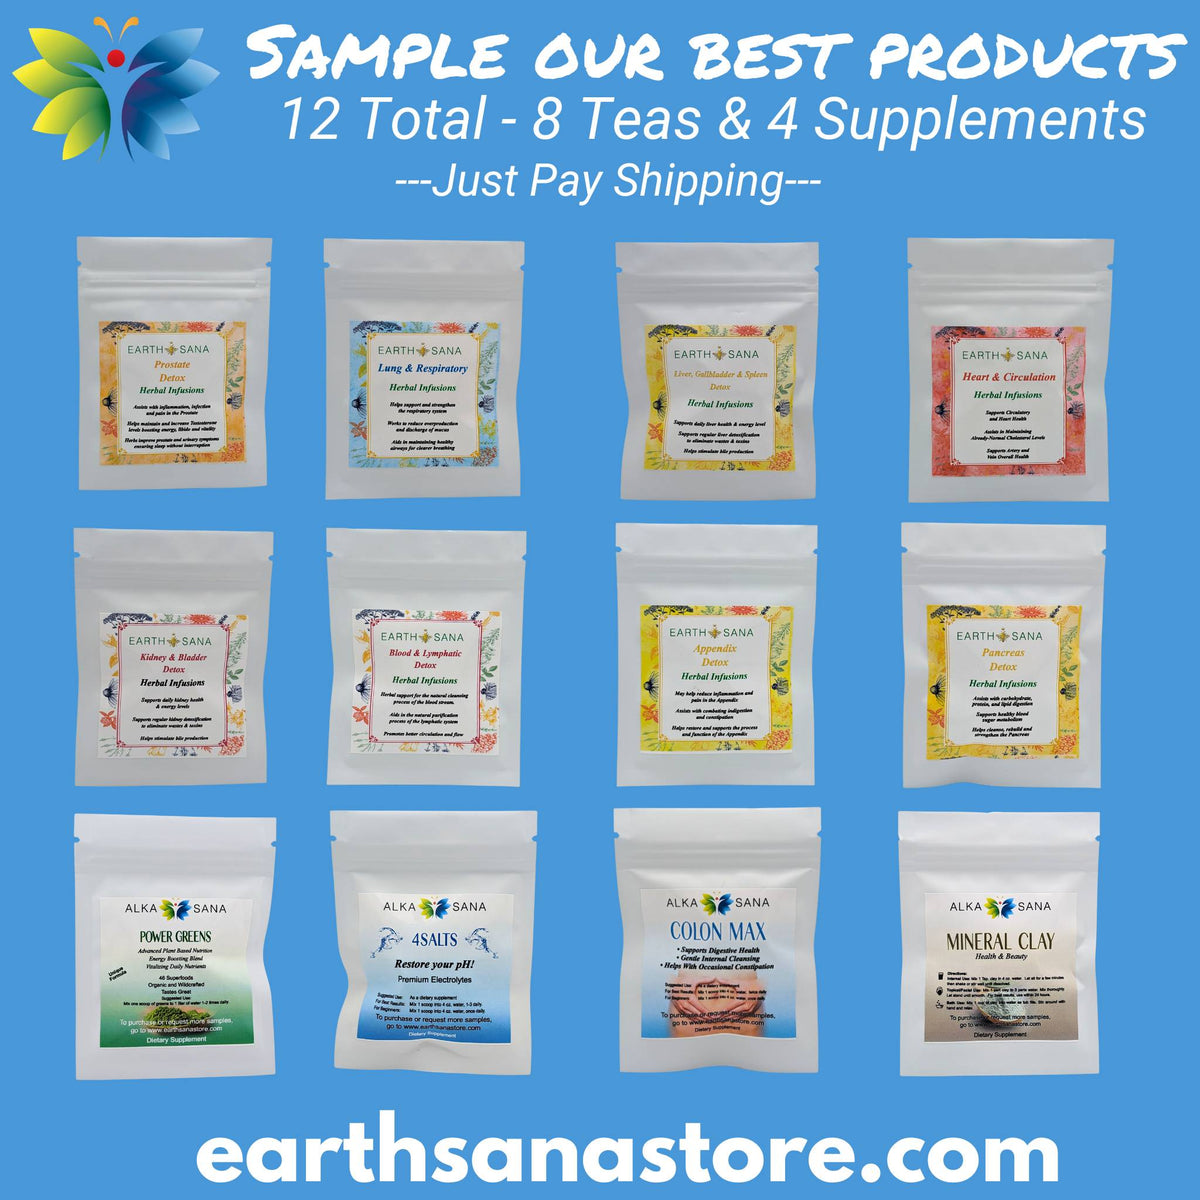 Earth Sana Free Sample Set (Just Pay Shipping - Apply Discount Code)